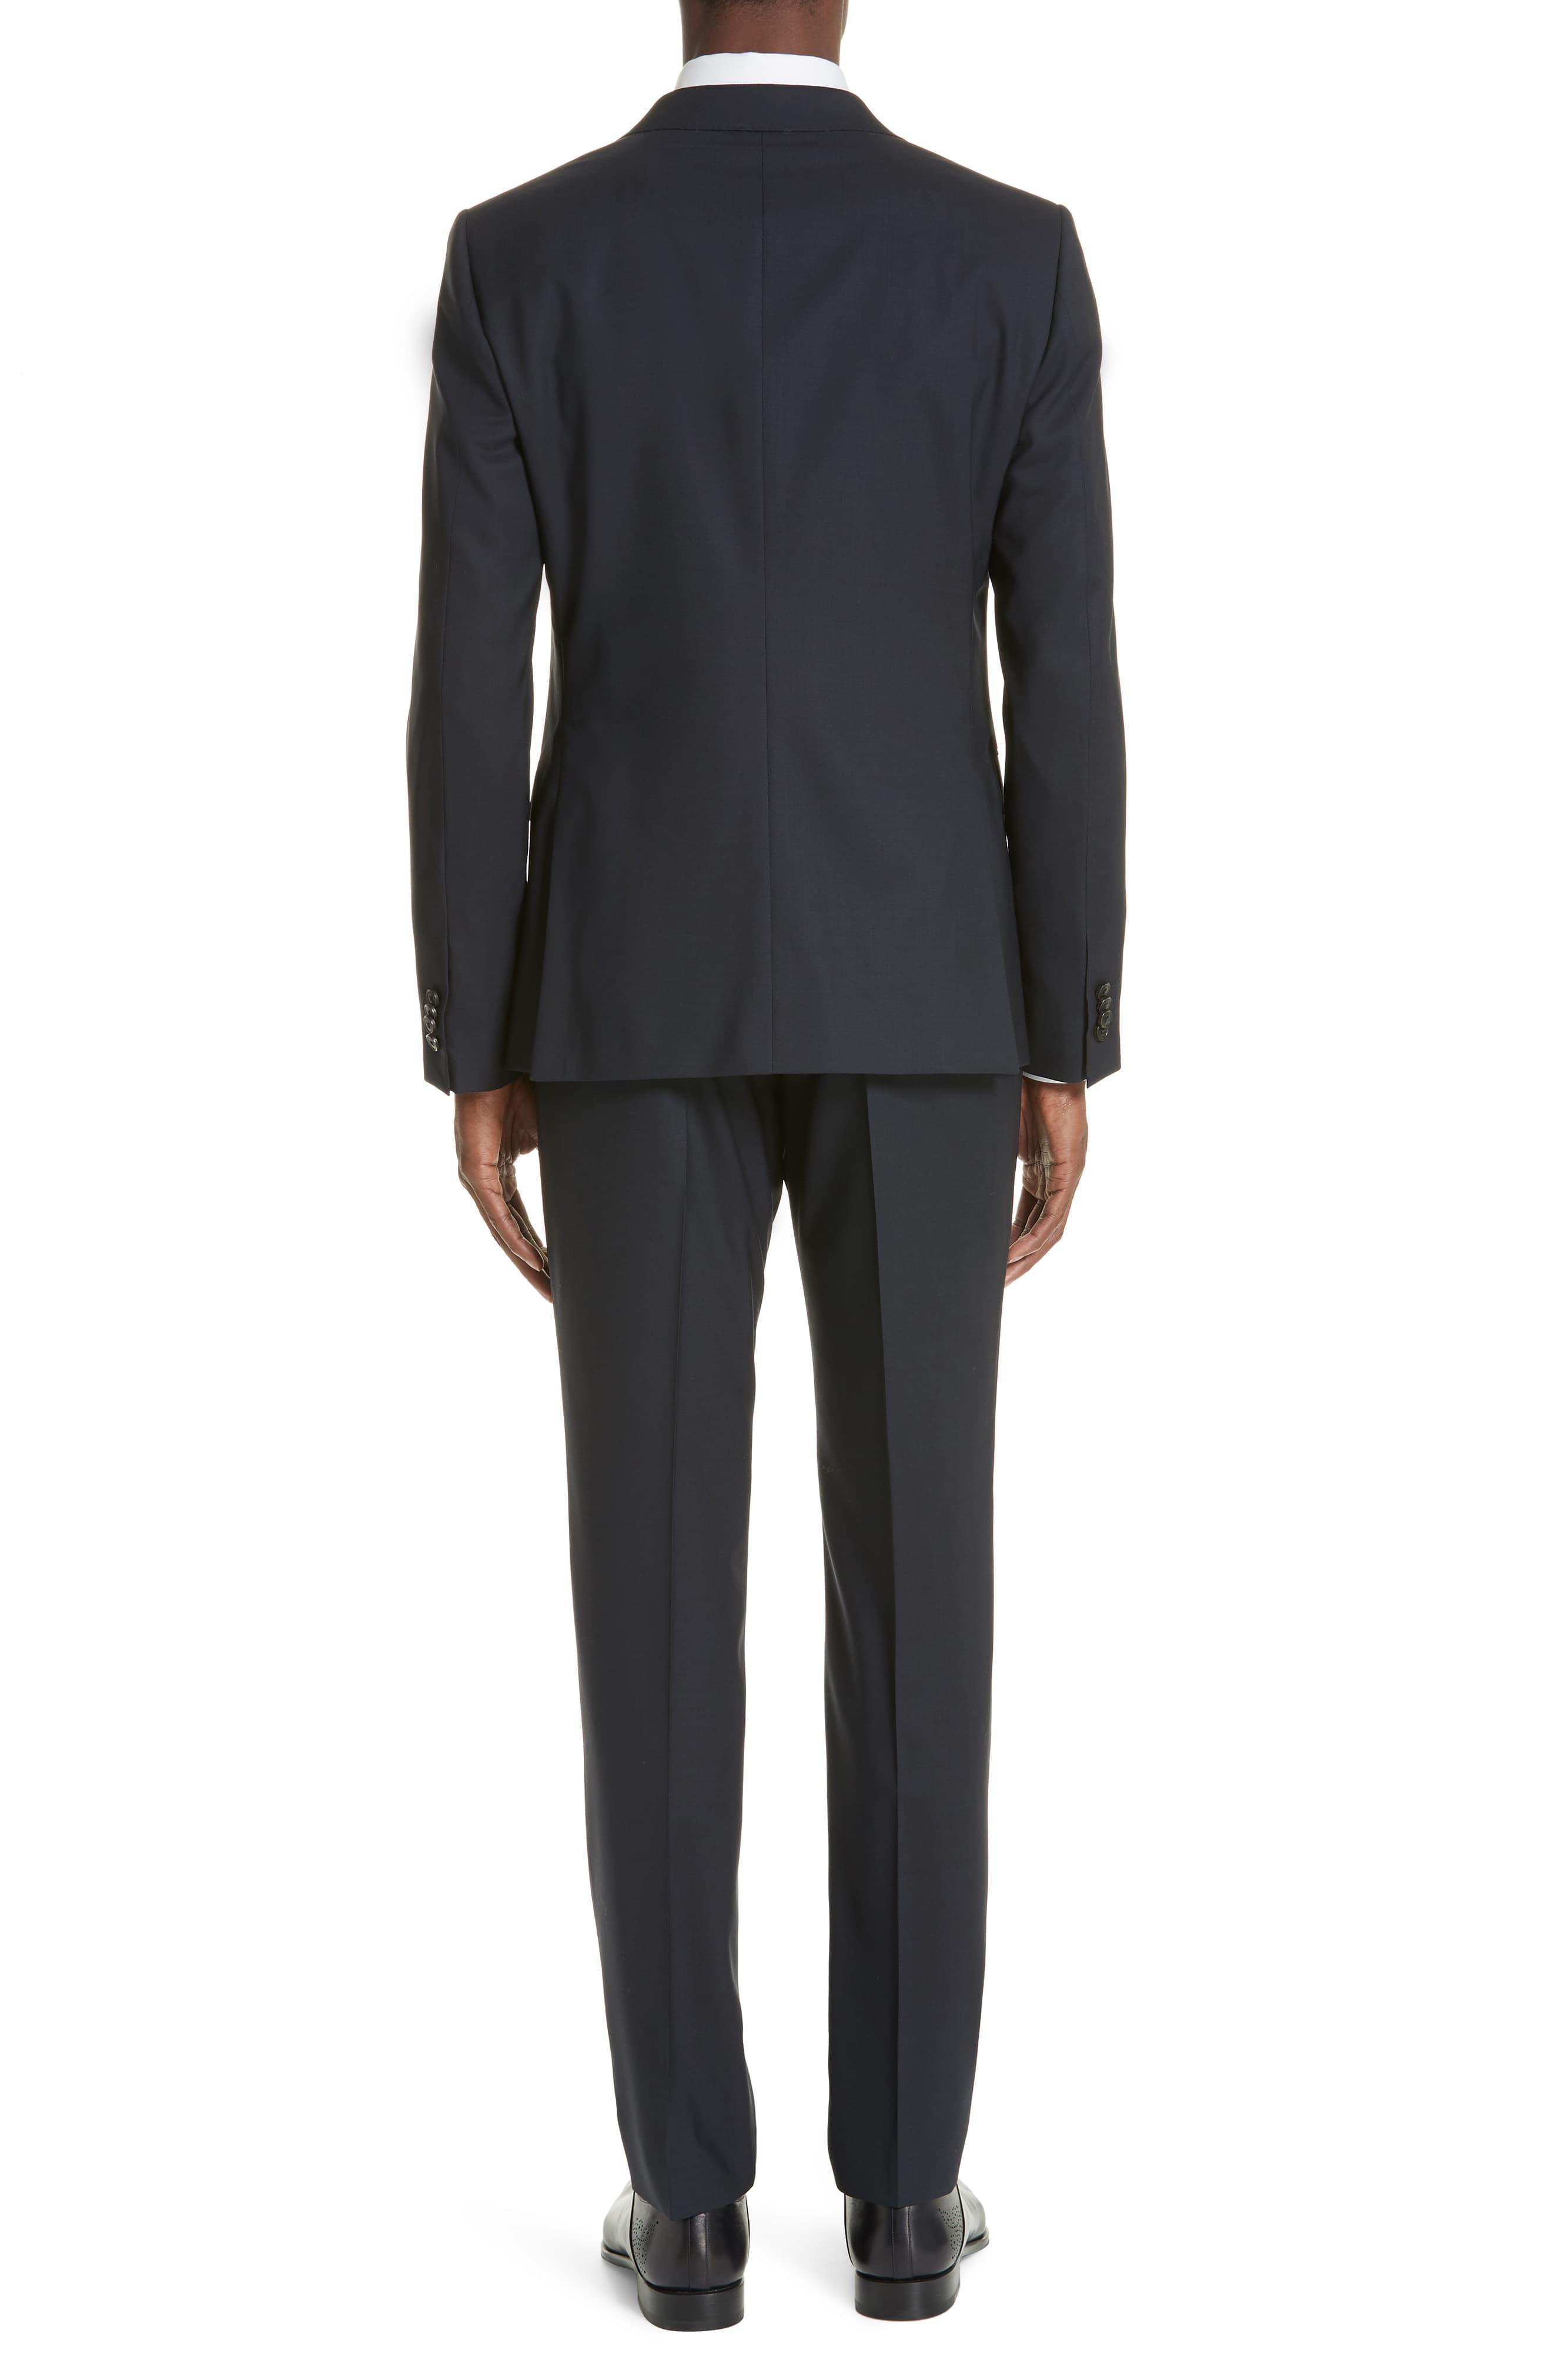 Z Zegna Trim Fit Solid Wool Travel Suit in Navy (Blue) for Men - Lyst